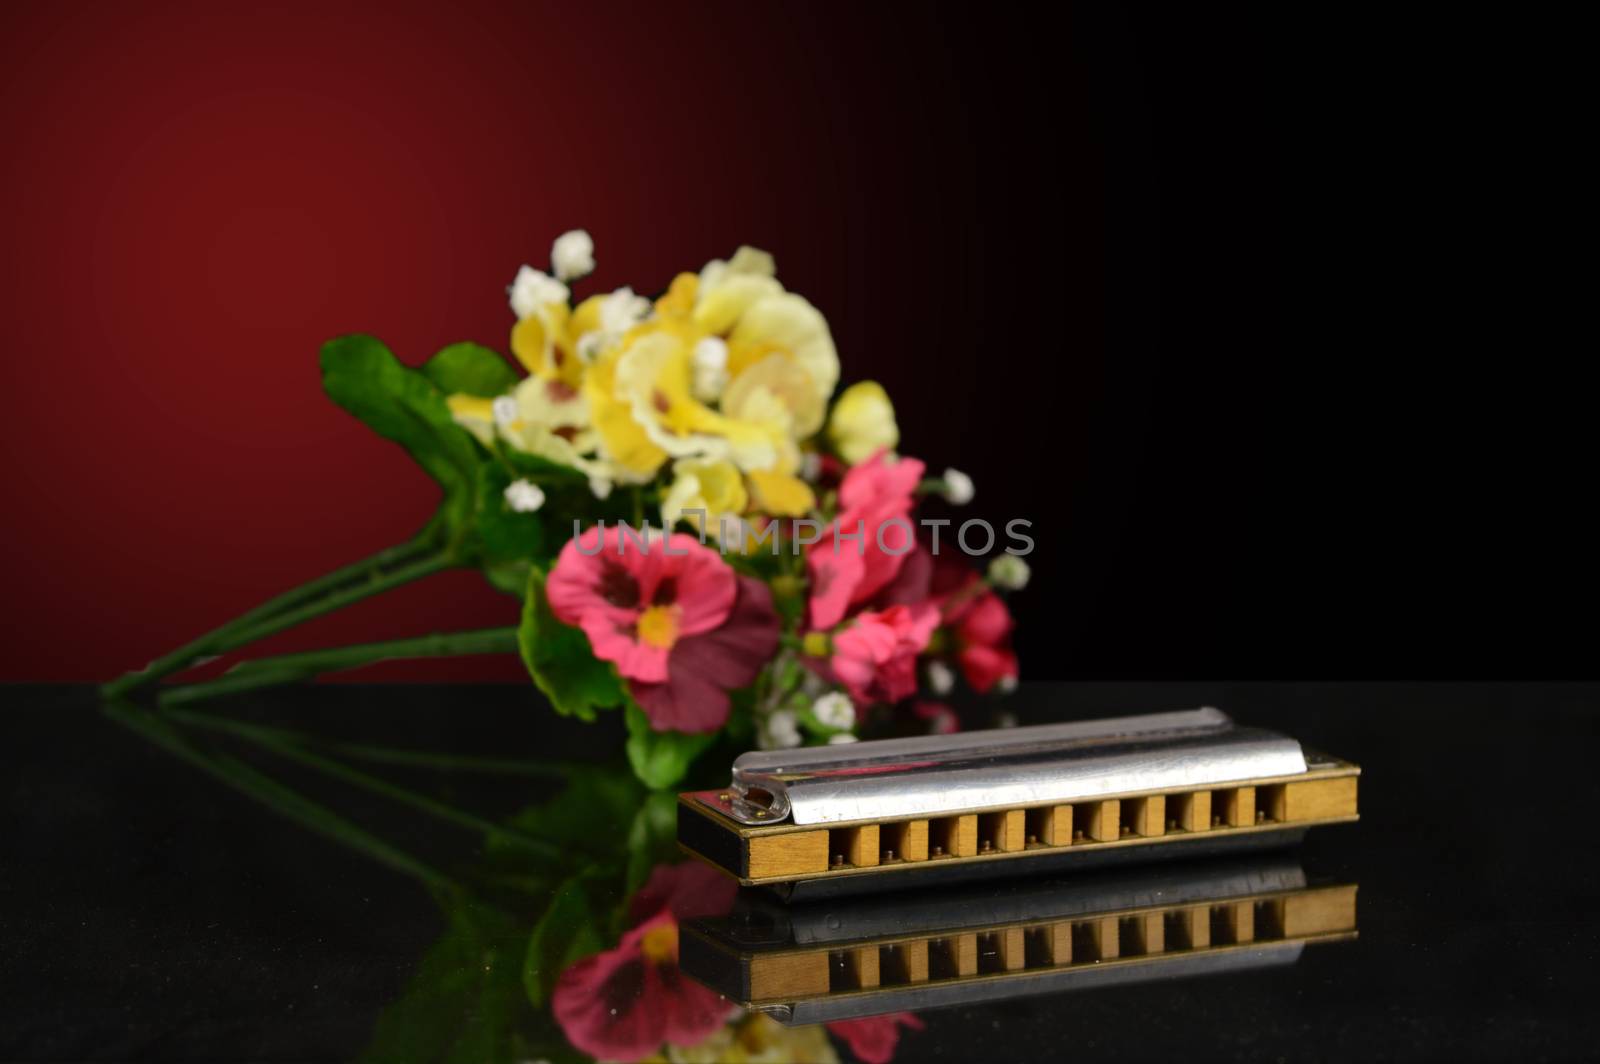 A closeup of a harmonica with a bouqet of flowers over a gradient background.